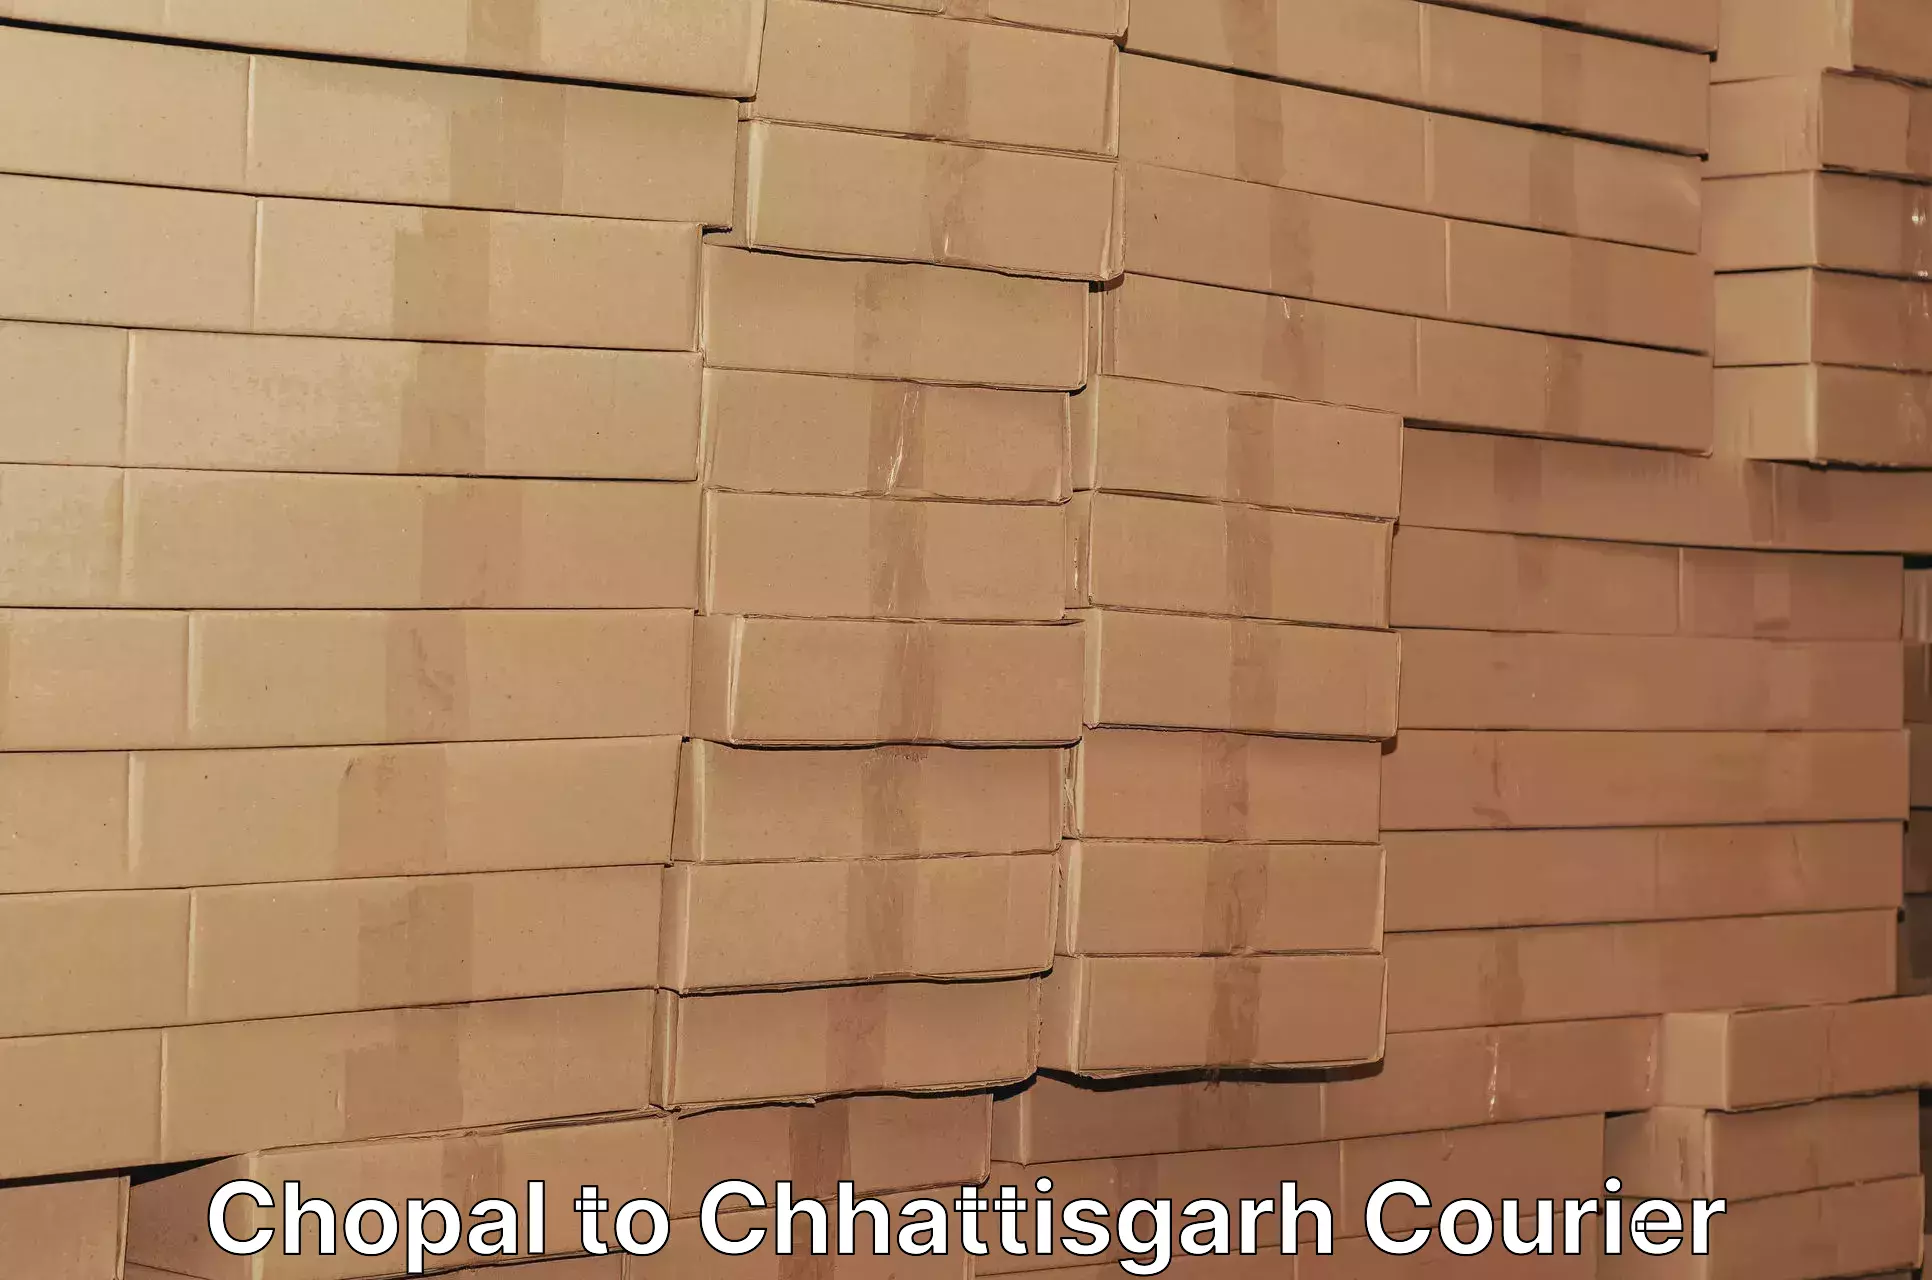 Courier rate comparison Chopal to Dhamtari